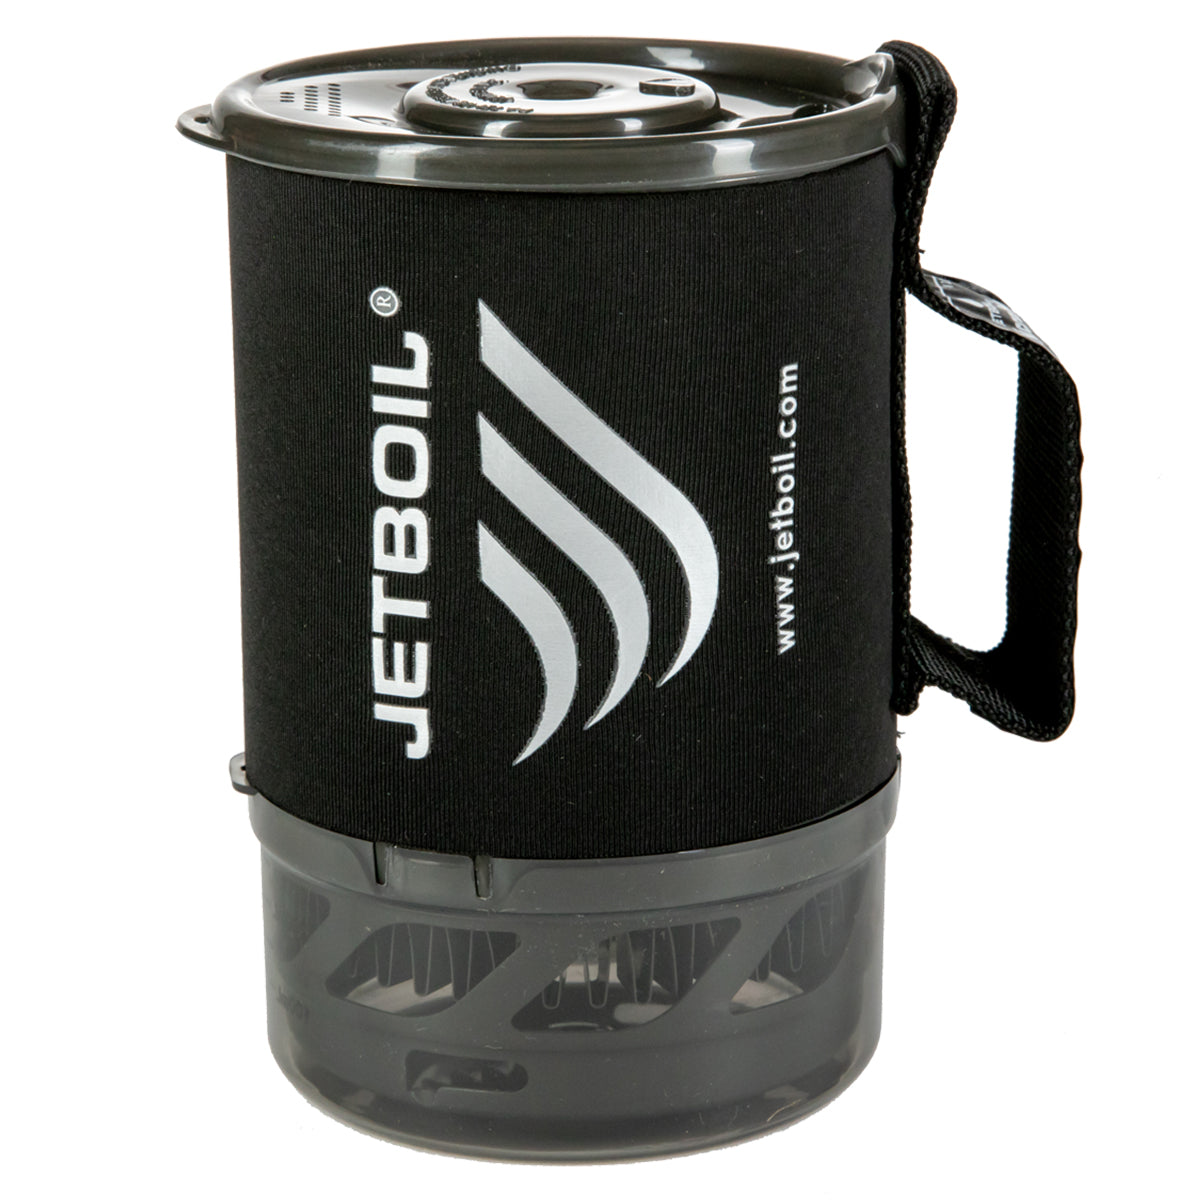 Jetboil MicroMo Stove System by Jetboil | Camping - goHUNT Shop